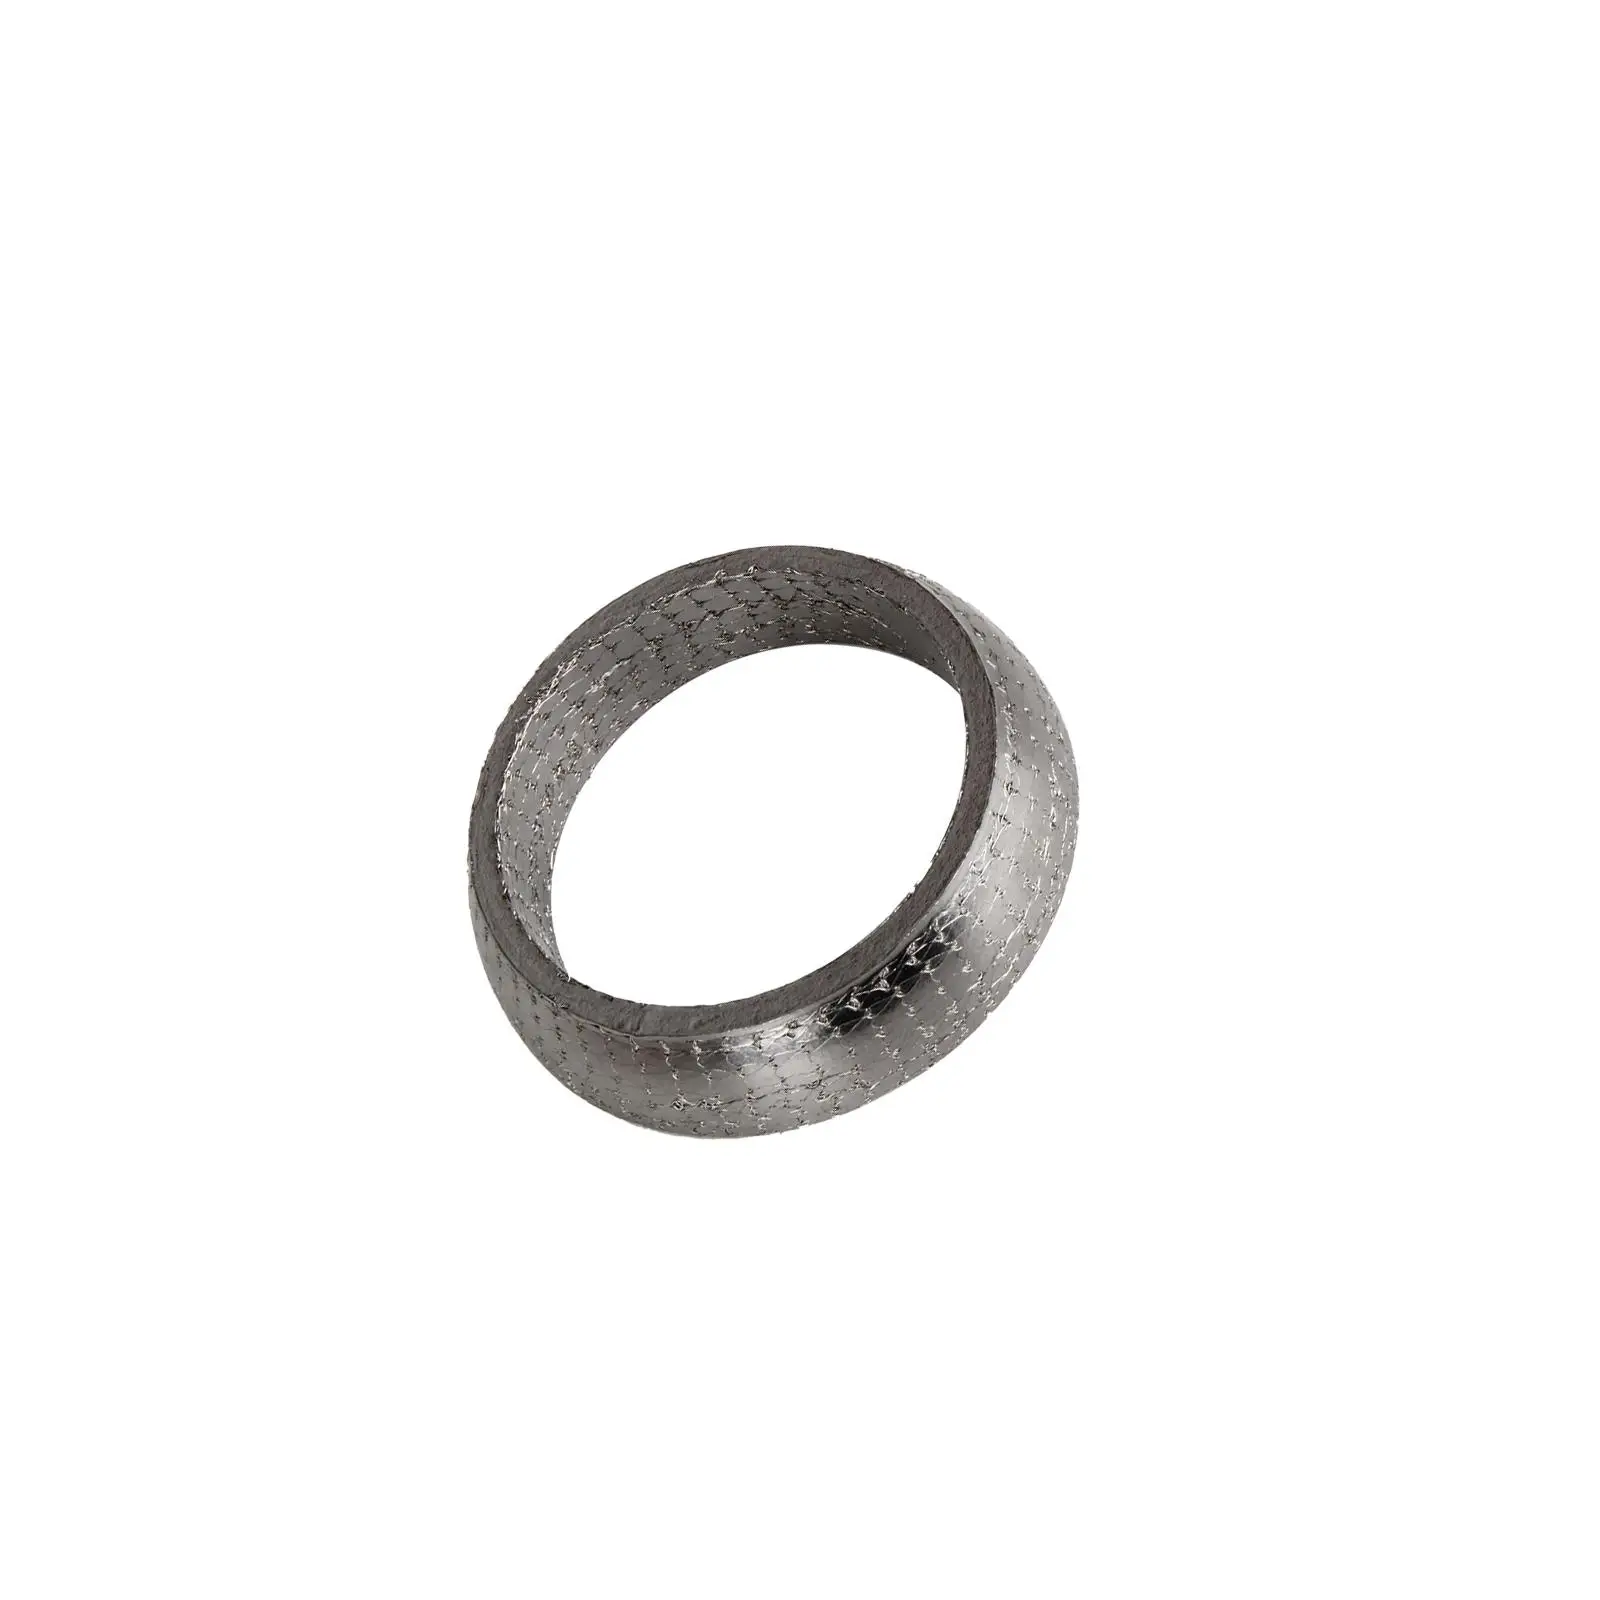 Graphite Gasket Stainless Steel Replacements to Adapter Donut